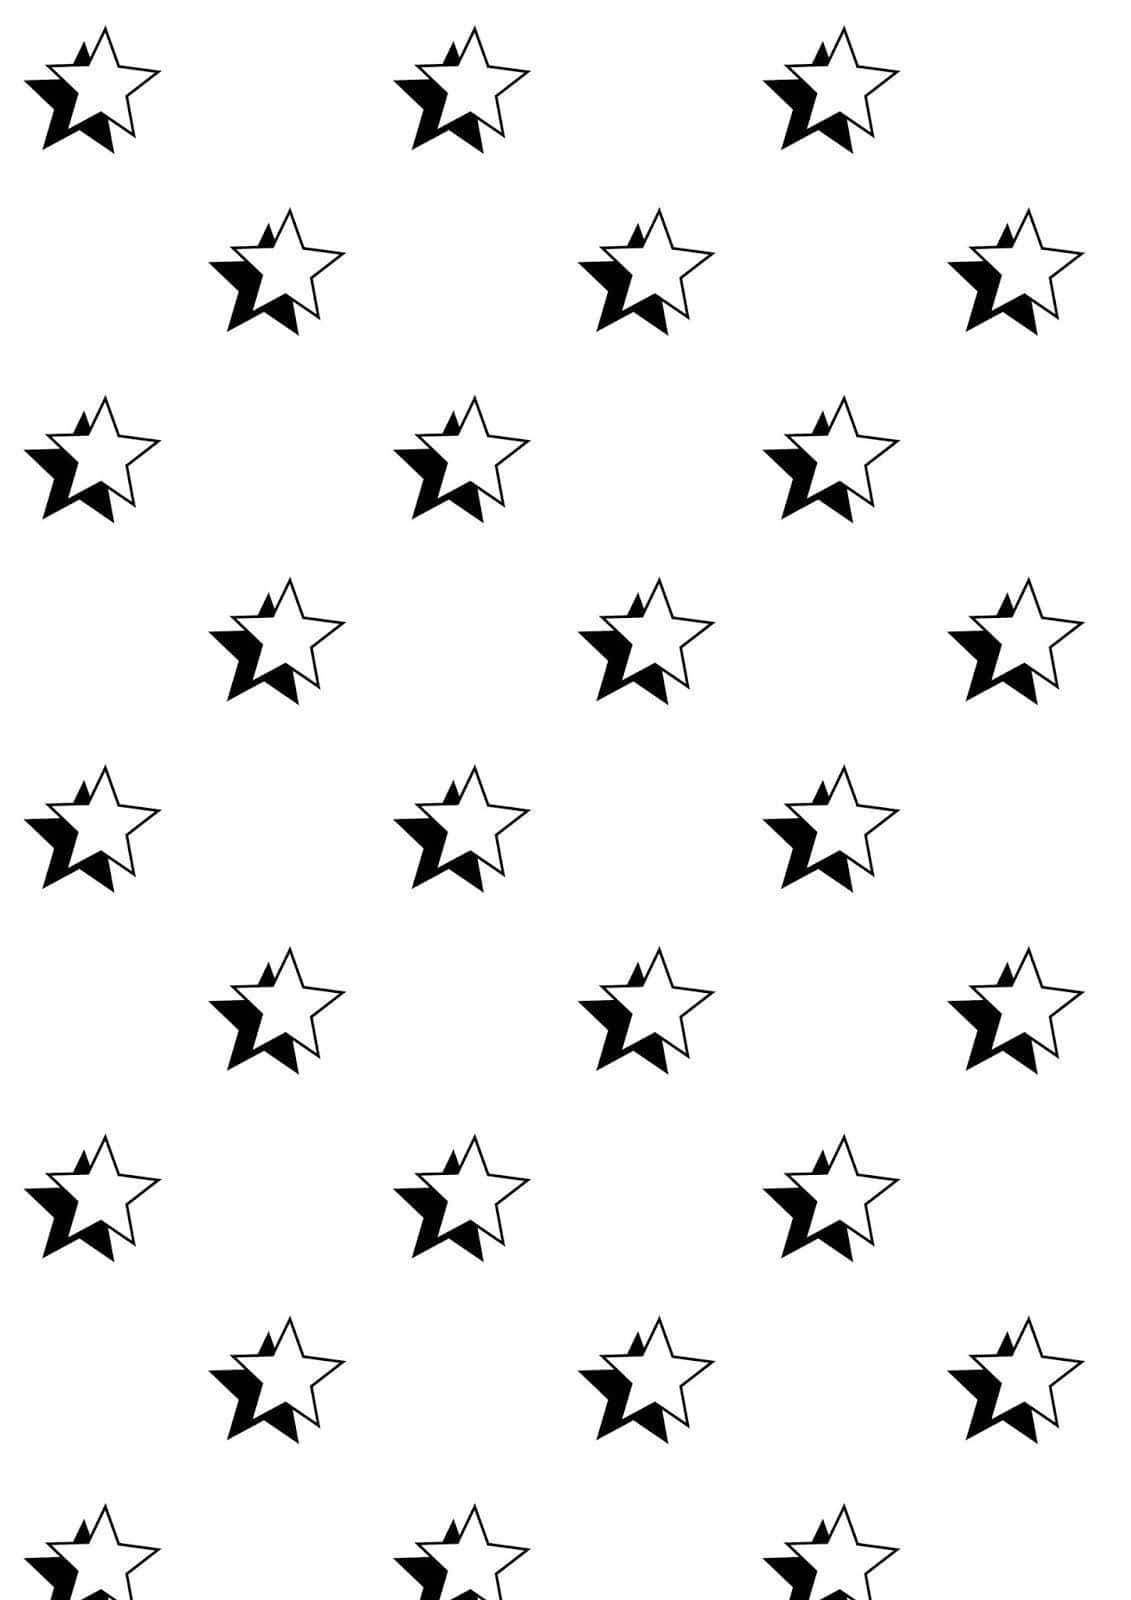 Brighten up your day with these twinkling stars! Wallpaper